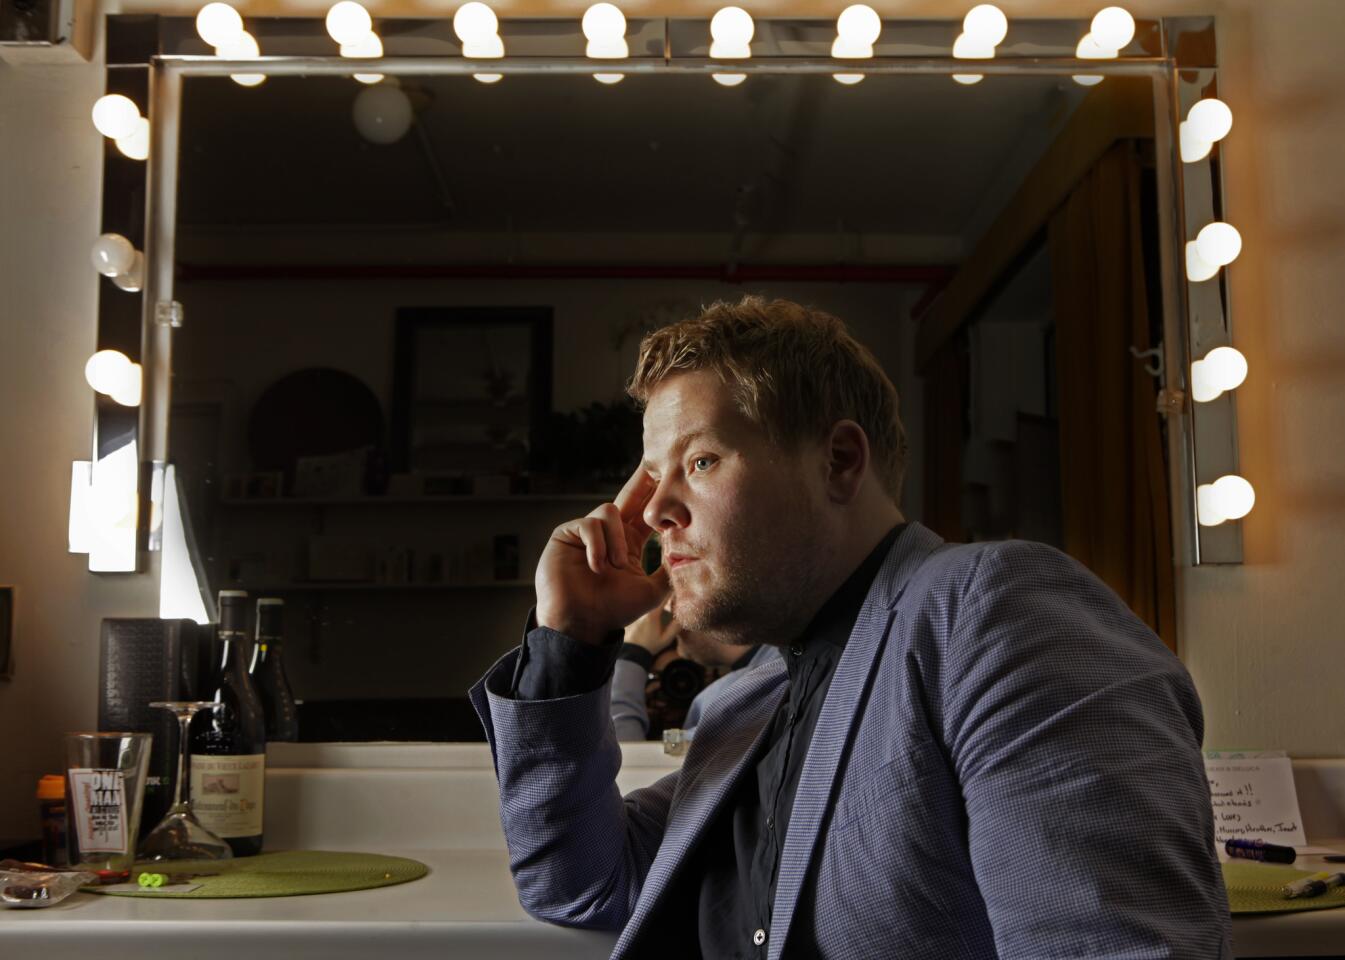 Arts and culture in pictures by The Times | 'One Man, Two Guvnors'' James Corden